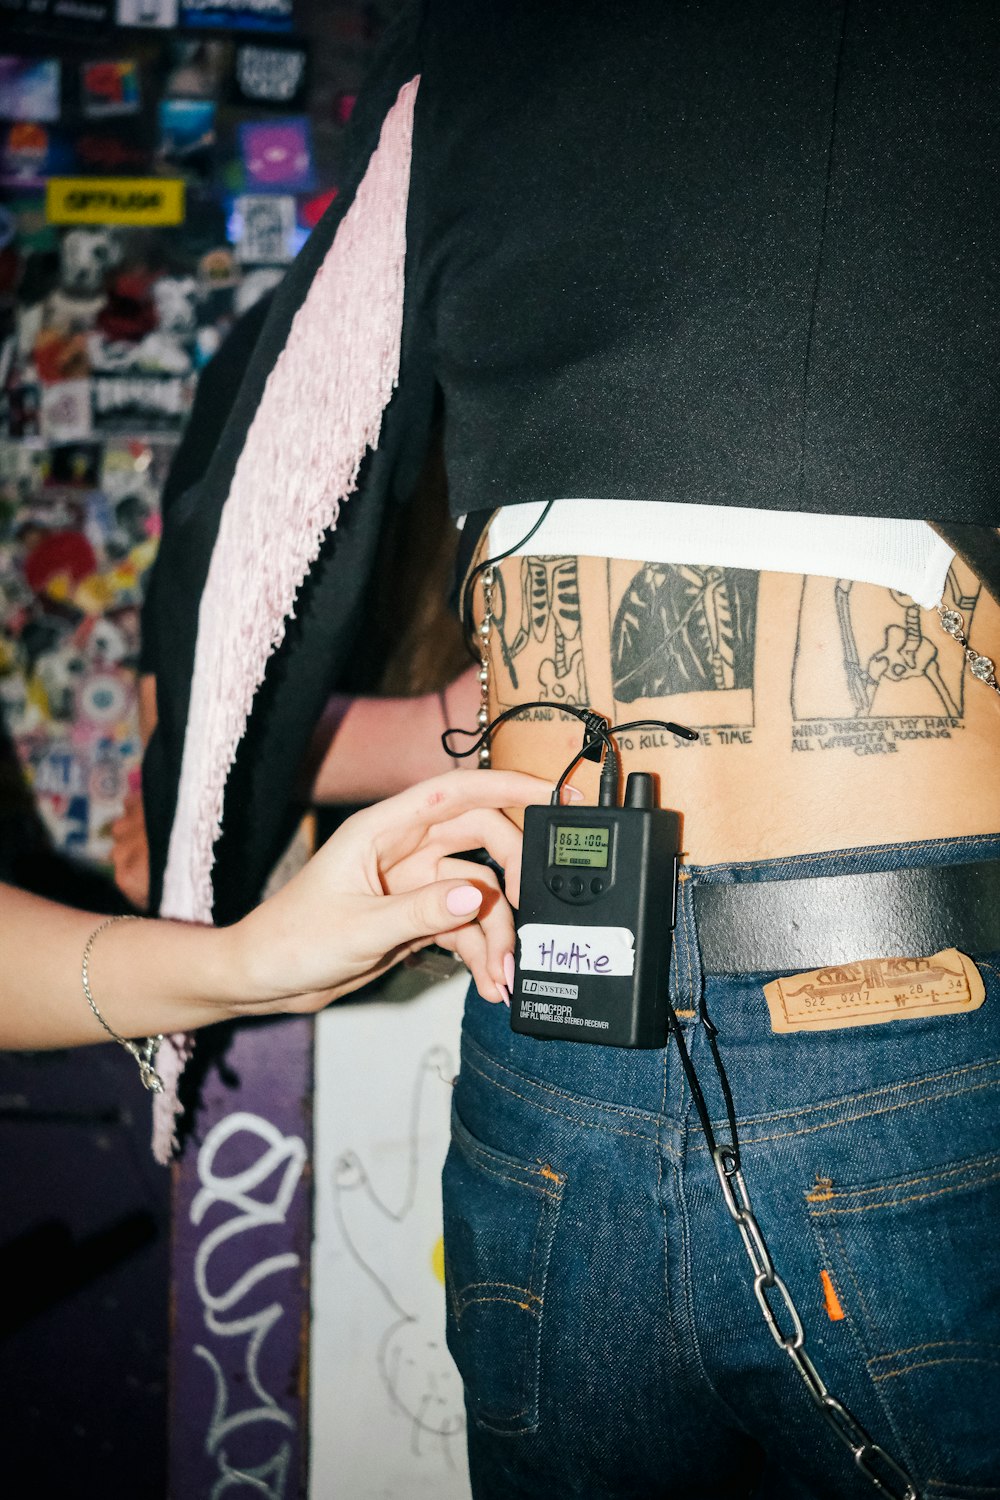 a person with tattoos on their stomach holding a cell phone